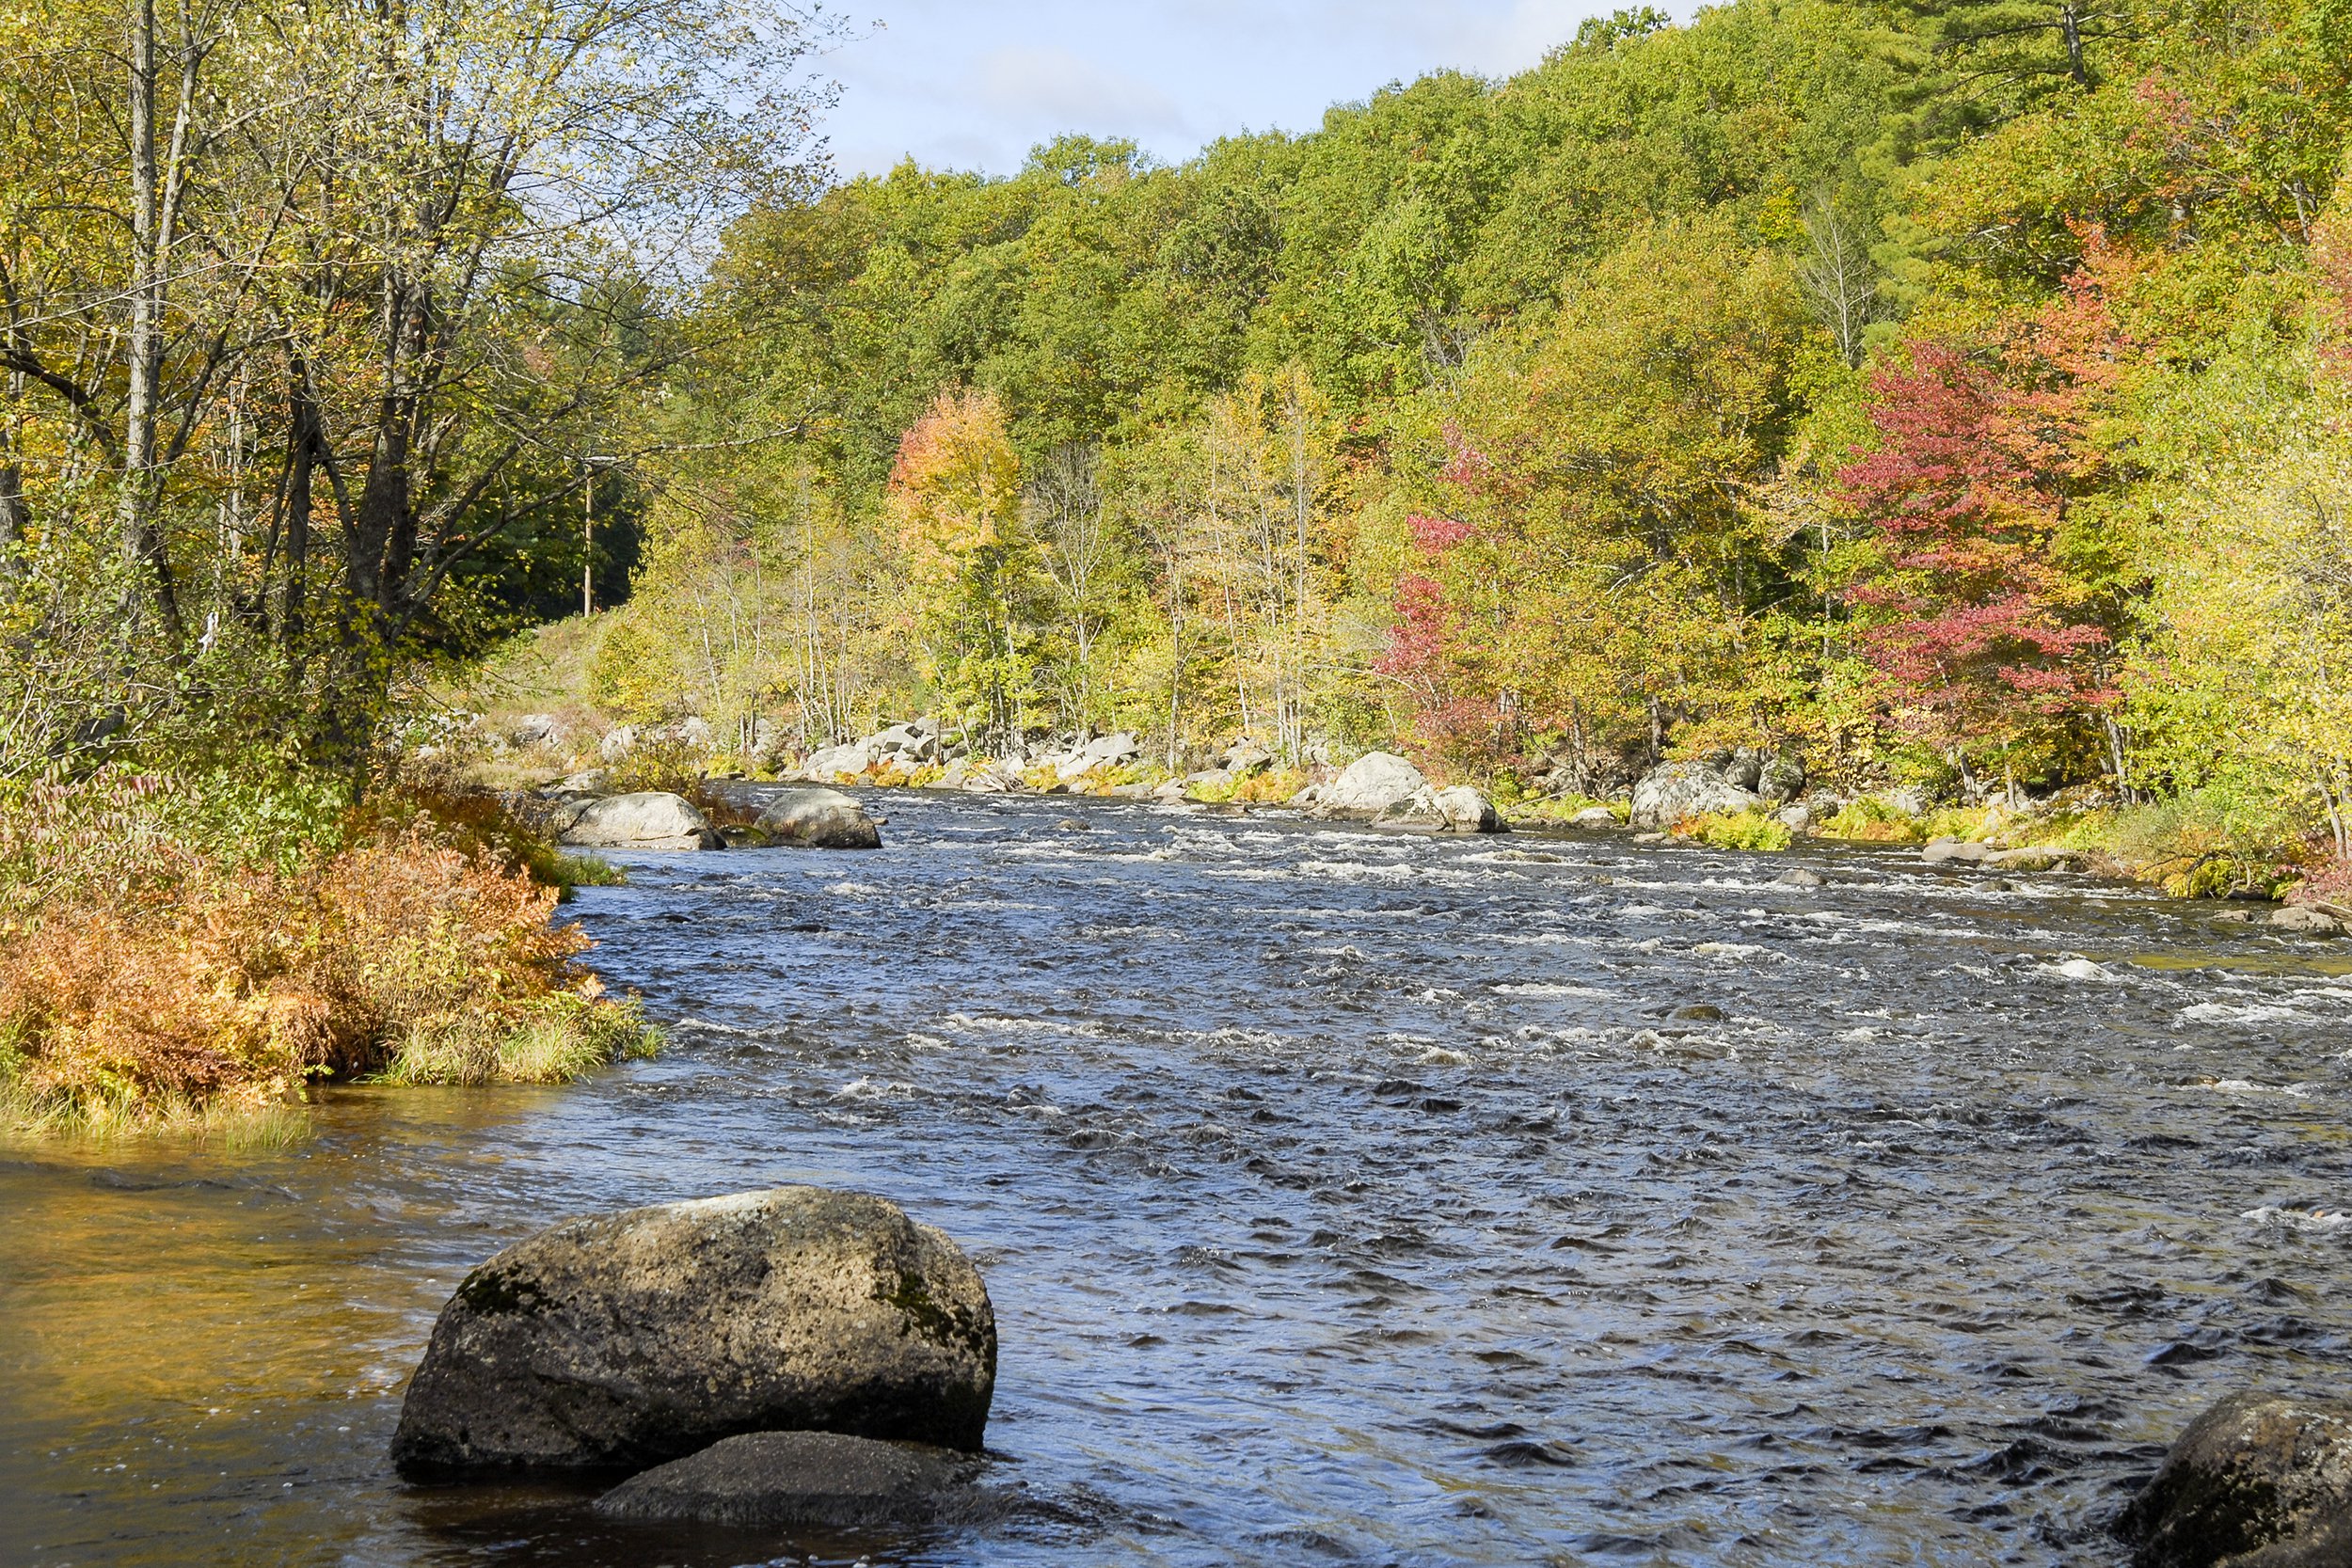 <p>Of all the great fishing spots in the New England state of New Hampshire, the <a href="https://www.des.nh.gov/sites/g/files/ehbemt341/files/documents/2020-01/rl-5.pdf">Contoocook River</a> stands out for supporting both cold- and warm-water habitats. While Atlantic salmon nibble below the surface of the water, keep an eye out above for one of the most impressive collections of birds in the region, including nighthawks, osprey, great blue herons, and bald eagles.</p>